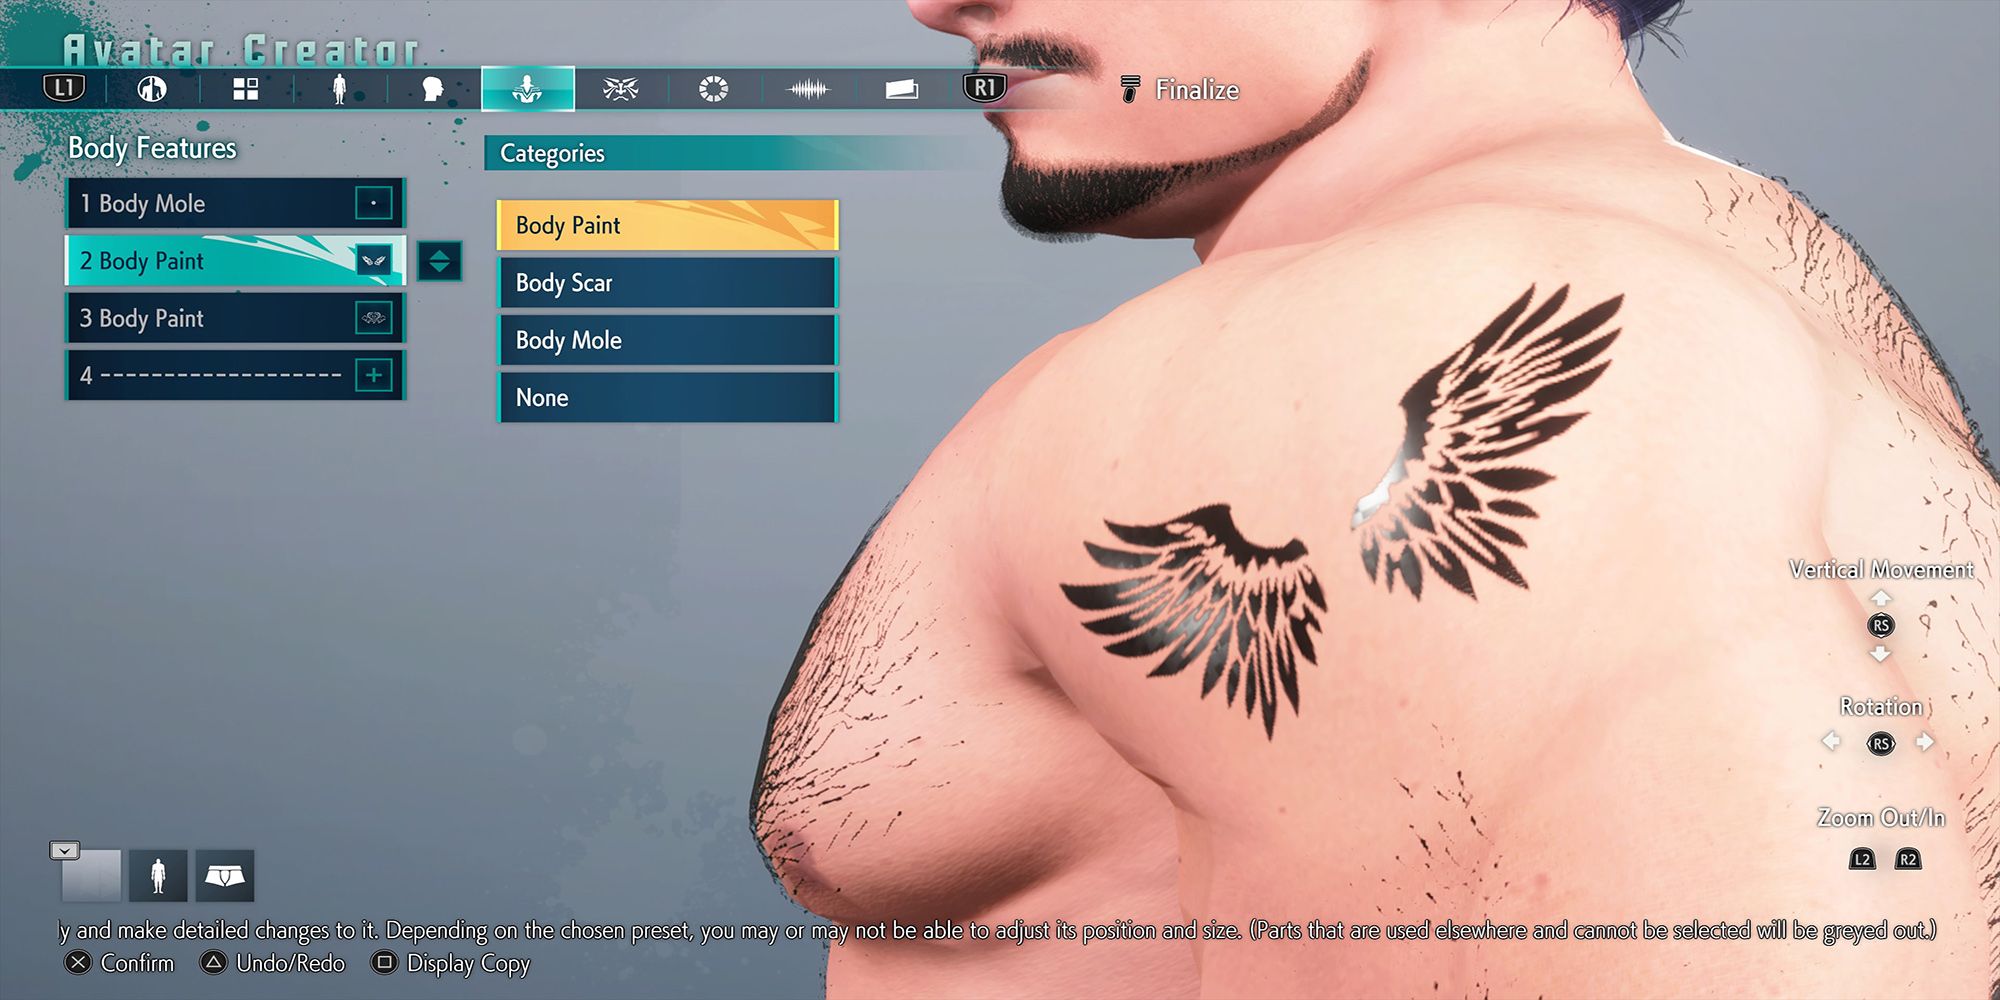 Chris Sanfilippo's avatar gets a wing tattoo on his arm in Street Fighter 6's Avatar Body Feature menu.